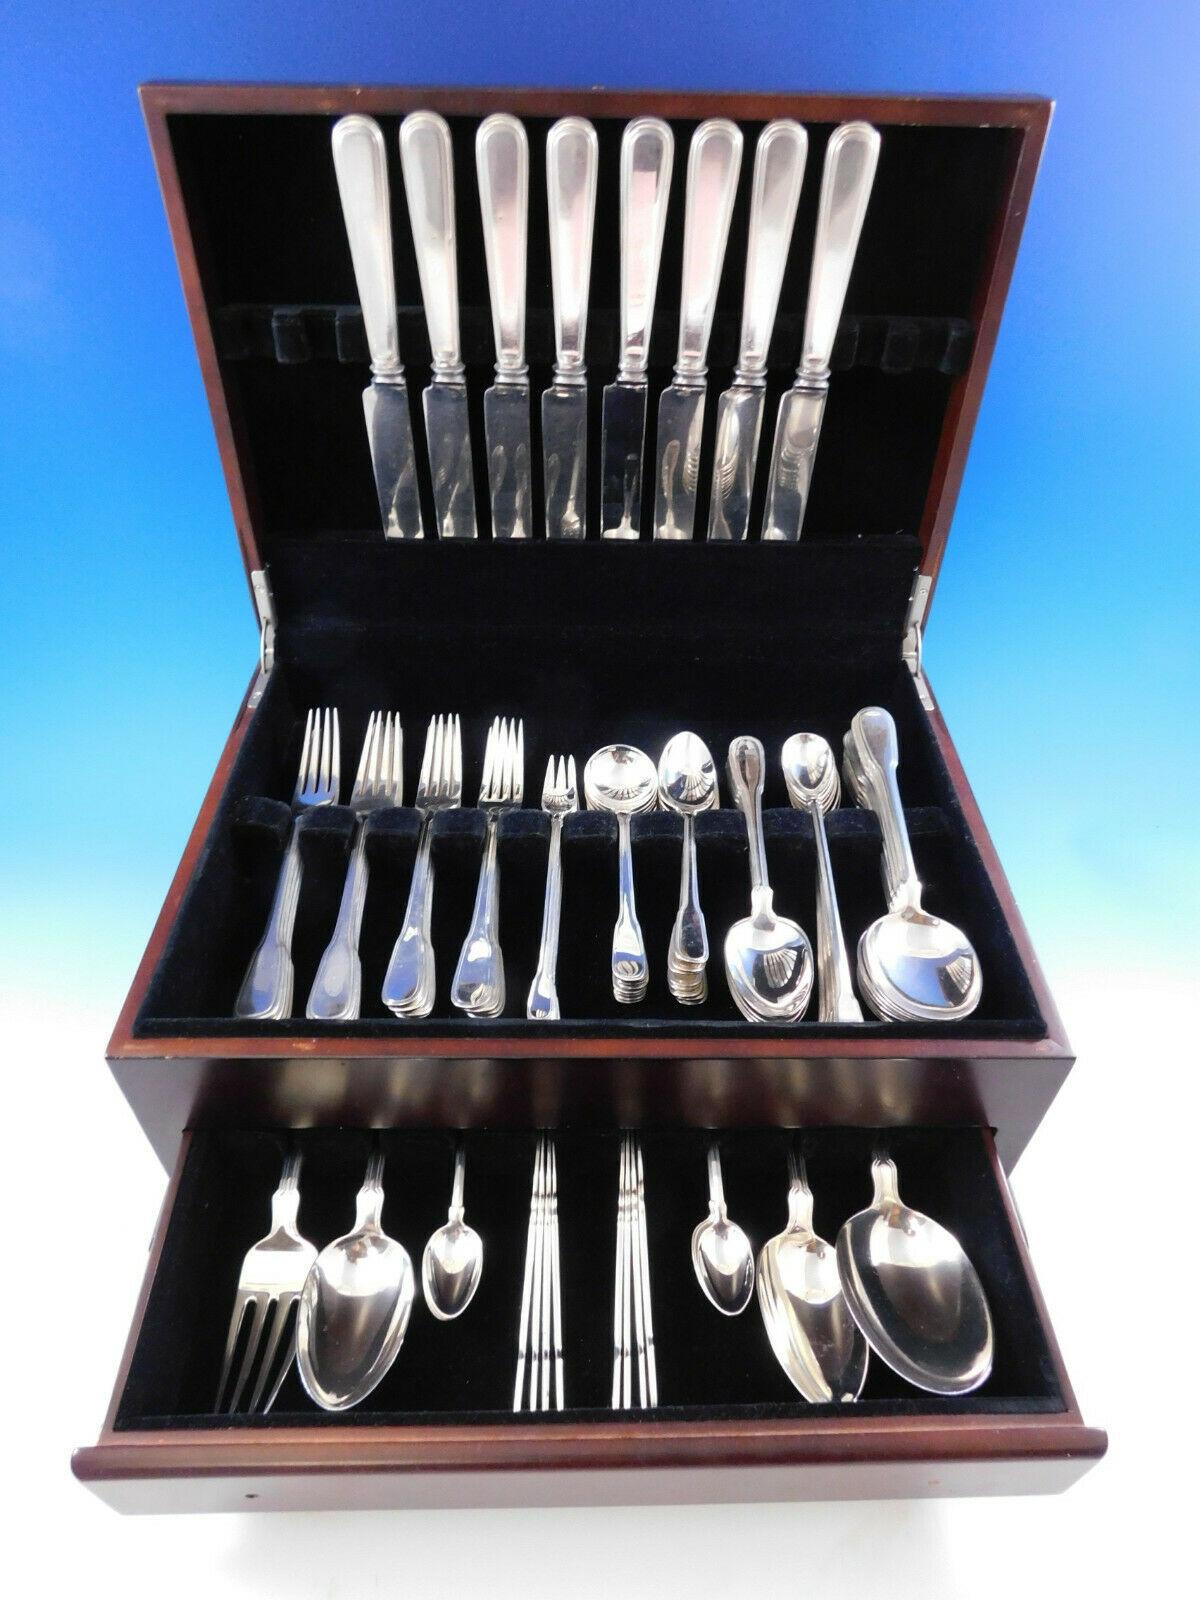 Superb Hamilton AKA Gramercy by Tiffany & Co. sterling silver dinner size flatware set, 92 pieces. This set includes:

8 dinner size knives, 10 1/4